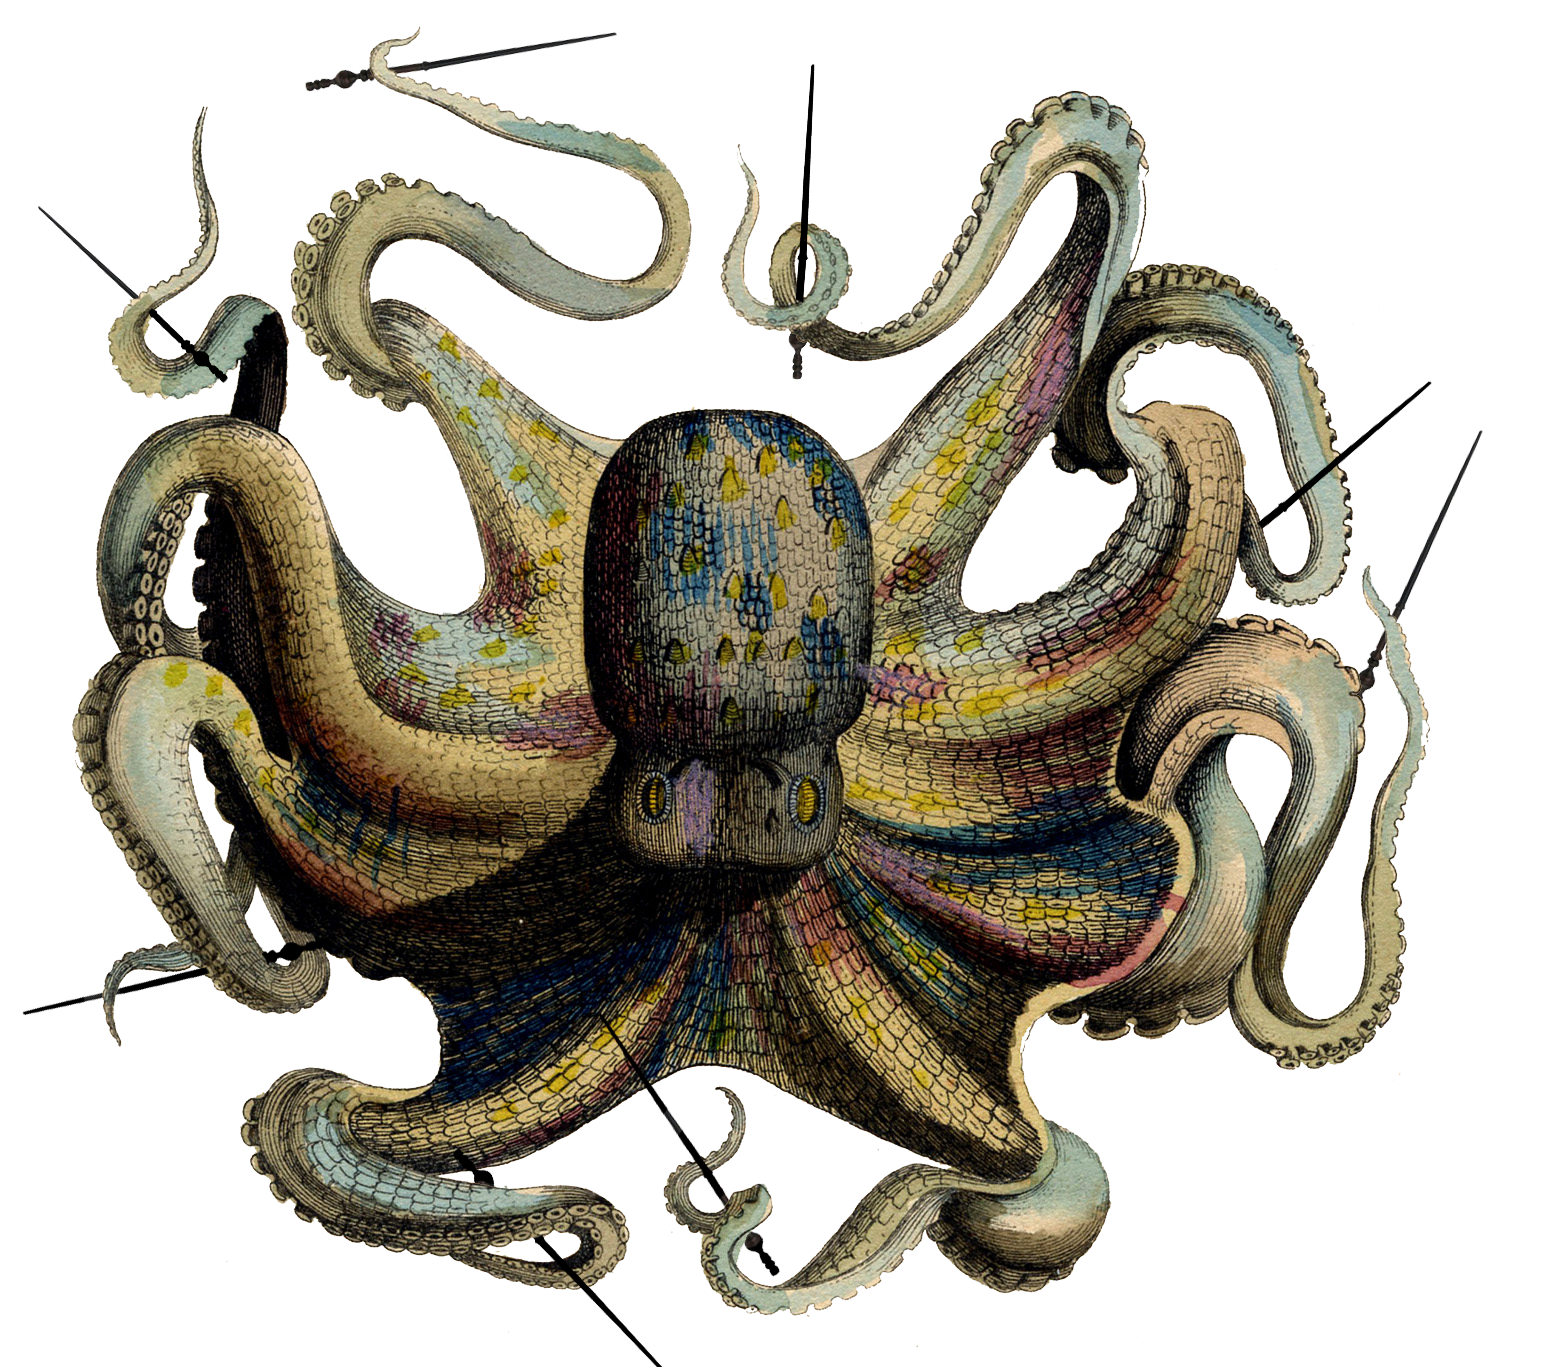 An old color engraving drawing of an octopus, with a thin black wand held in each tentacle.